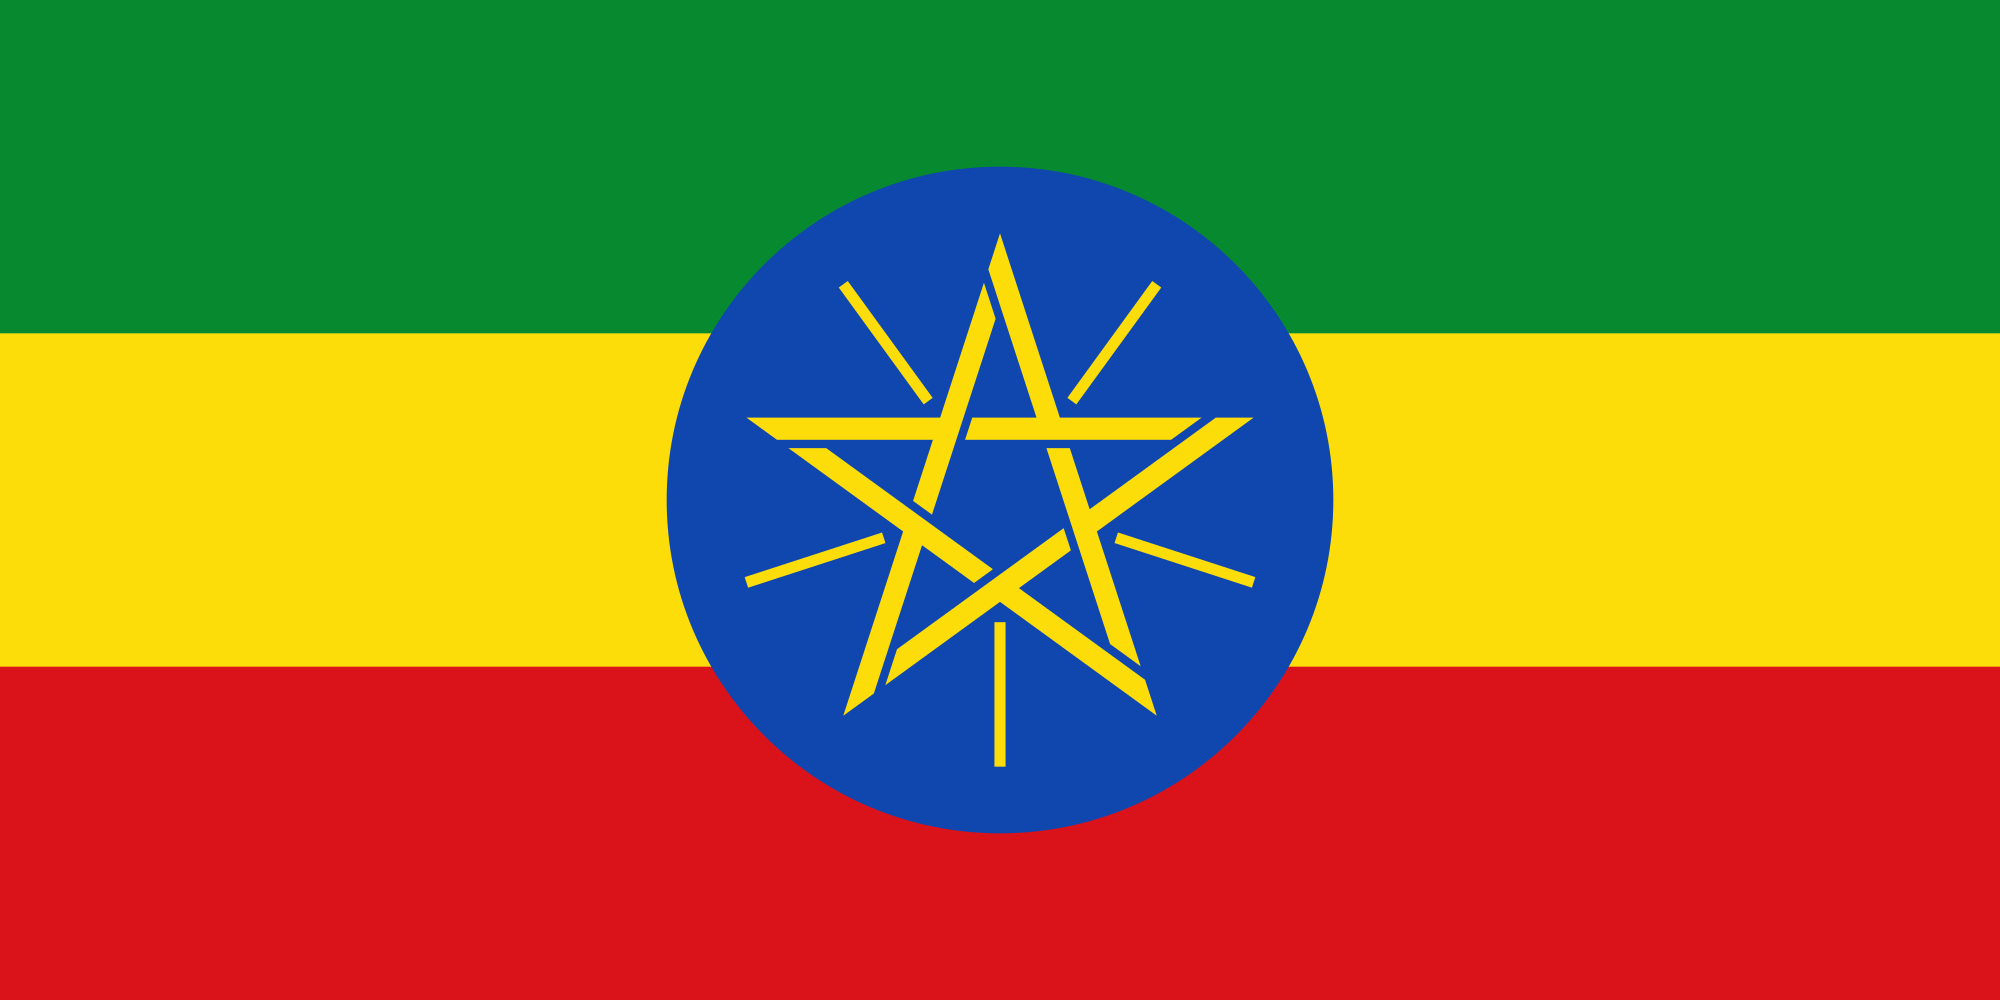 Green and Yellow in a Circle Logo - Flag of Ethiopia